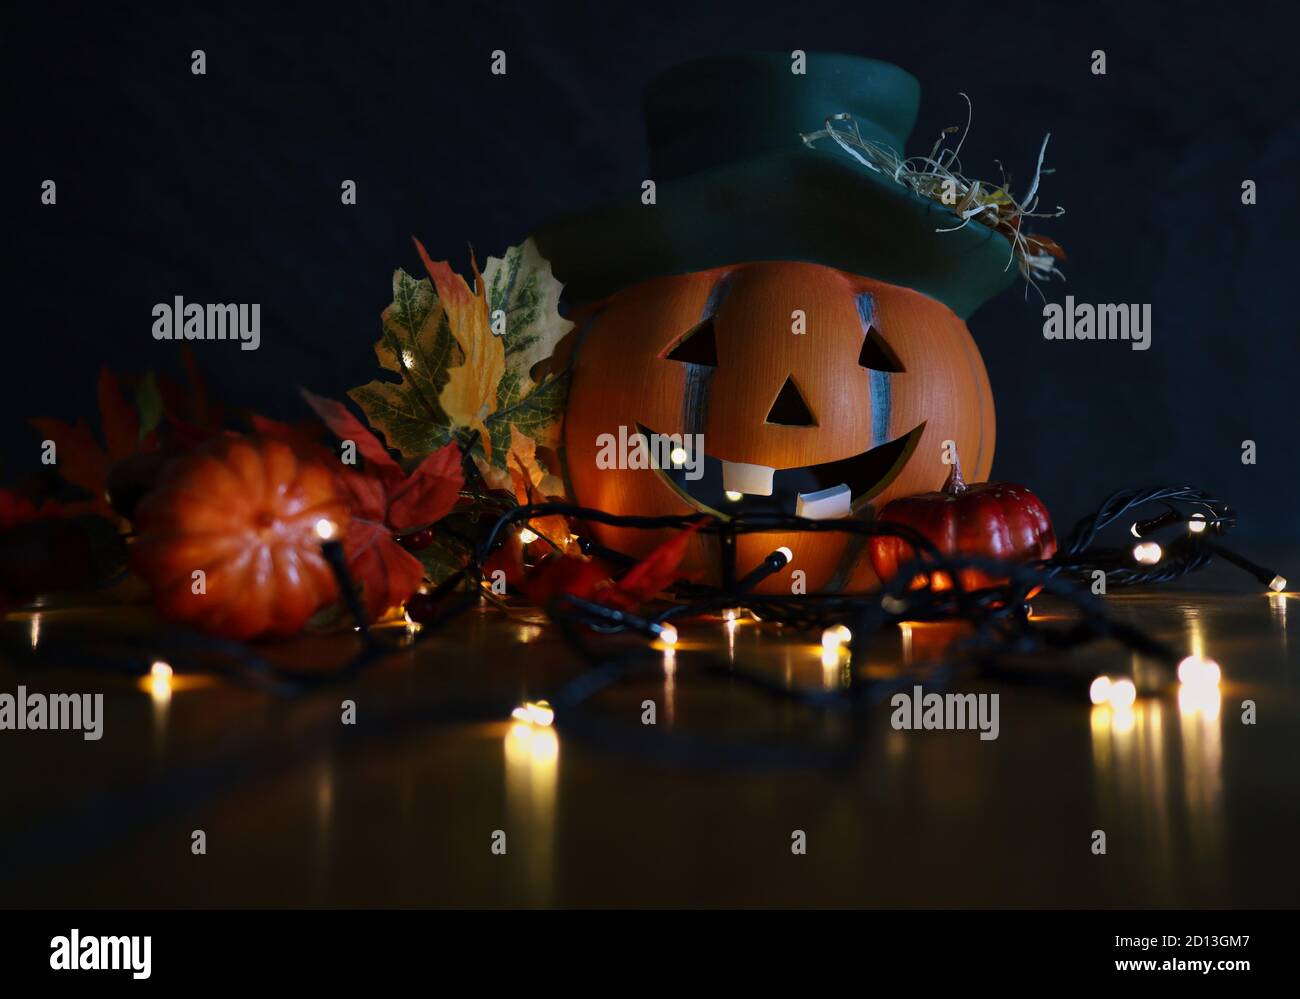 Ceramic Halloween Orange Pumpkin with Green Hat and Smile with Artificial Autumn Leaves and Blinking Lights. Moody Autumn and Halloween Vibes. Stock Photo